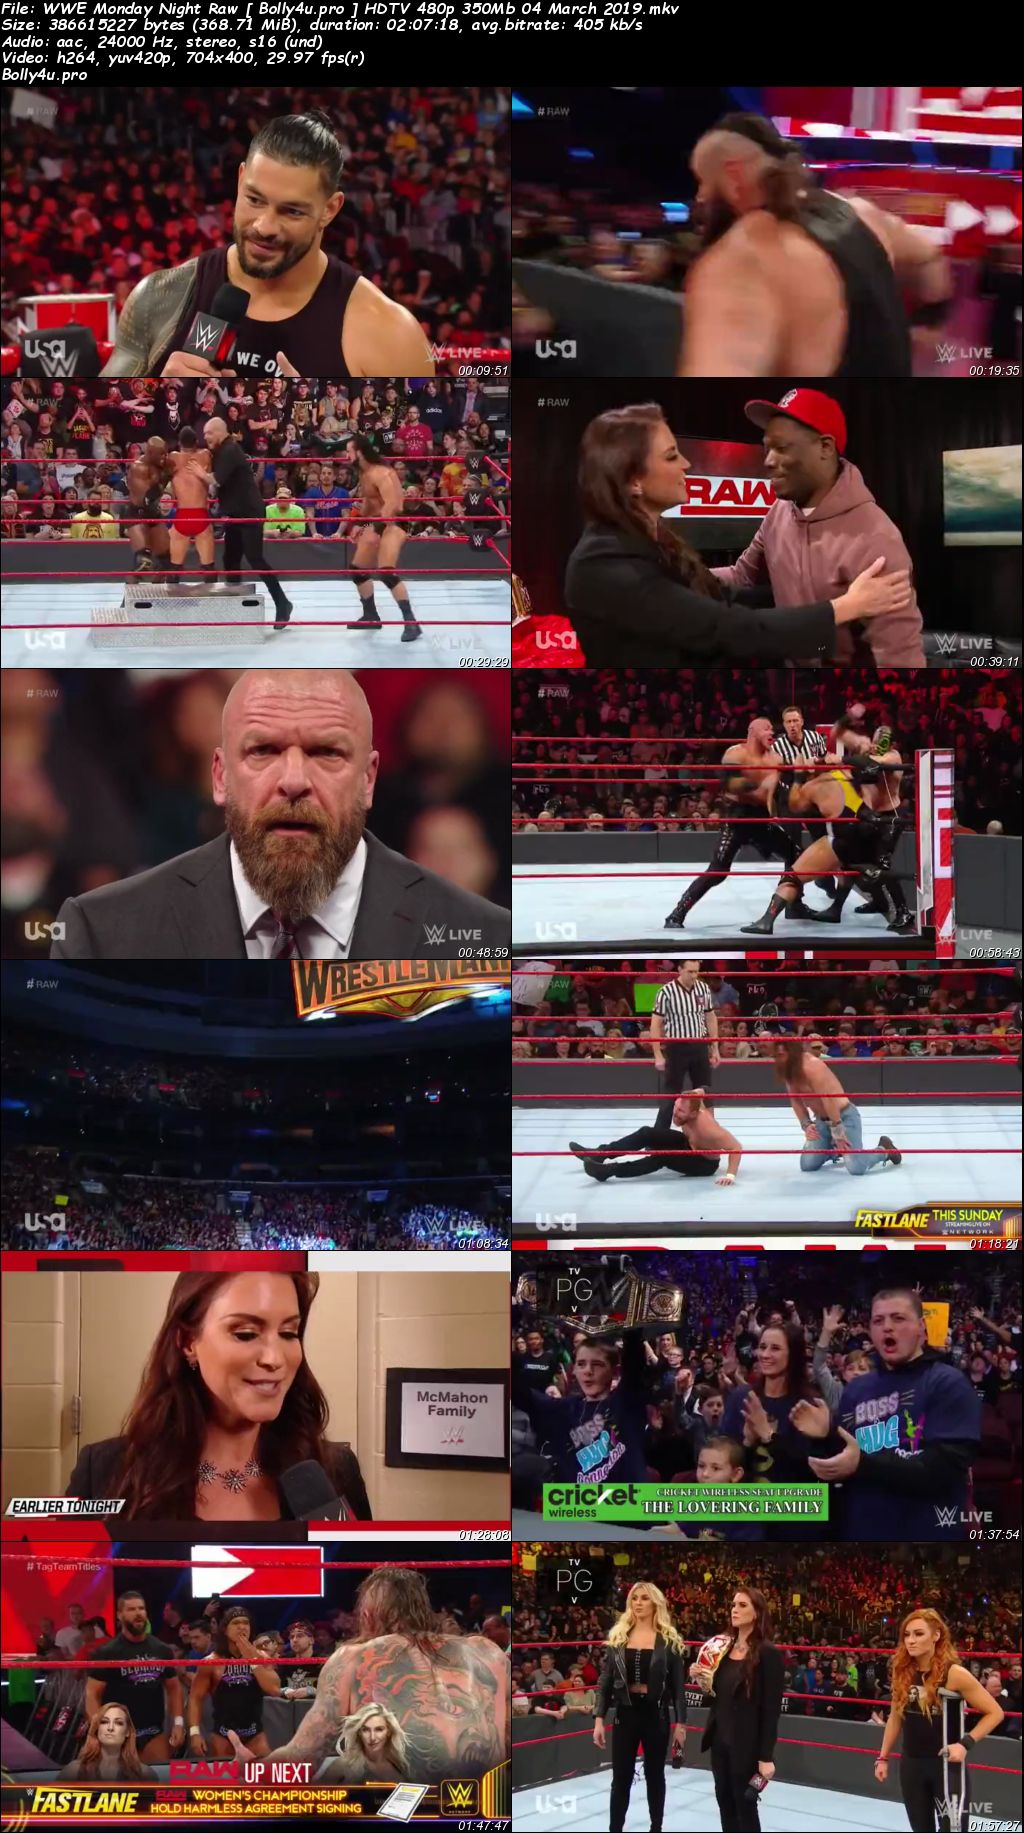 WWE Monday Night Raw HDTV 480p 350Mb 04 March 2019 Download